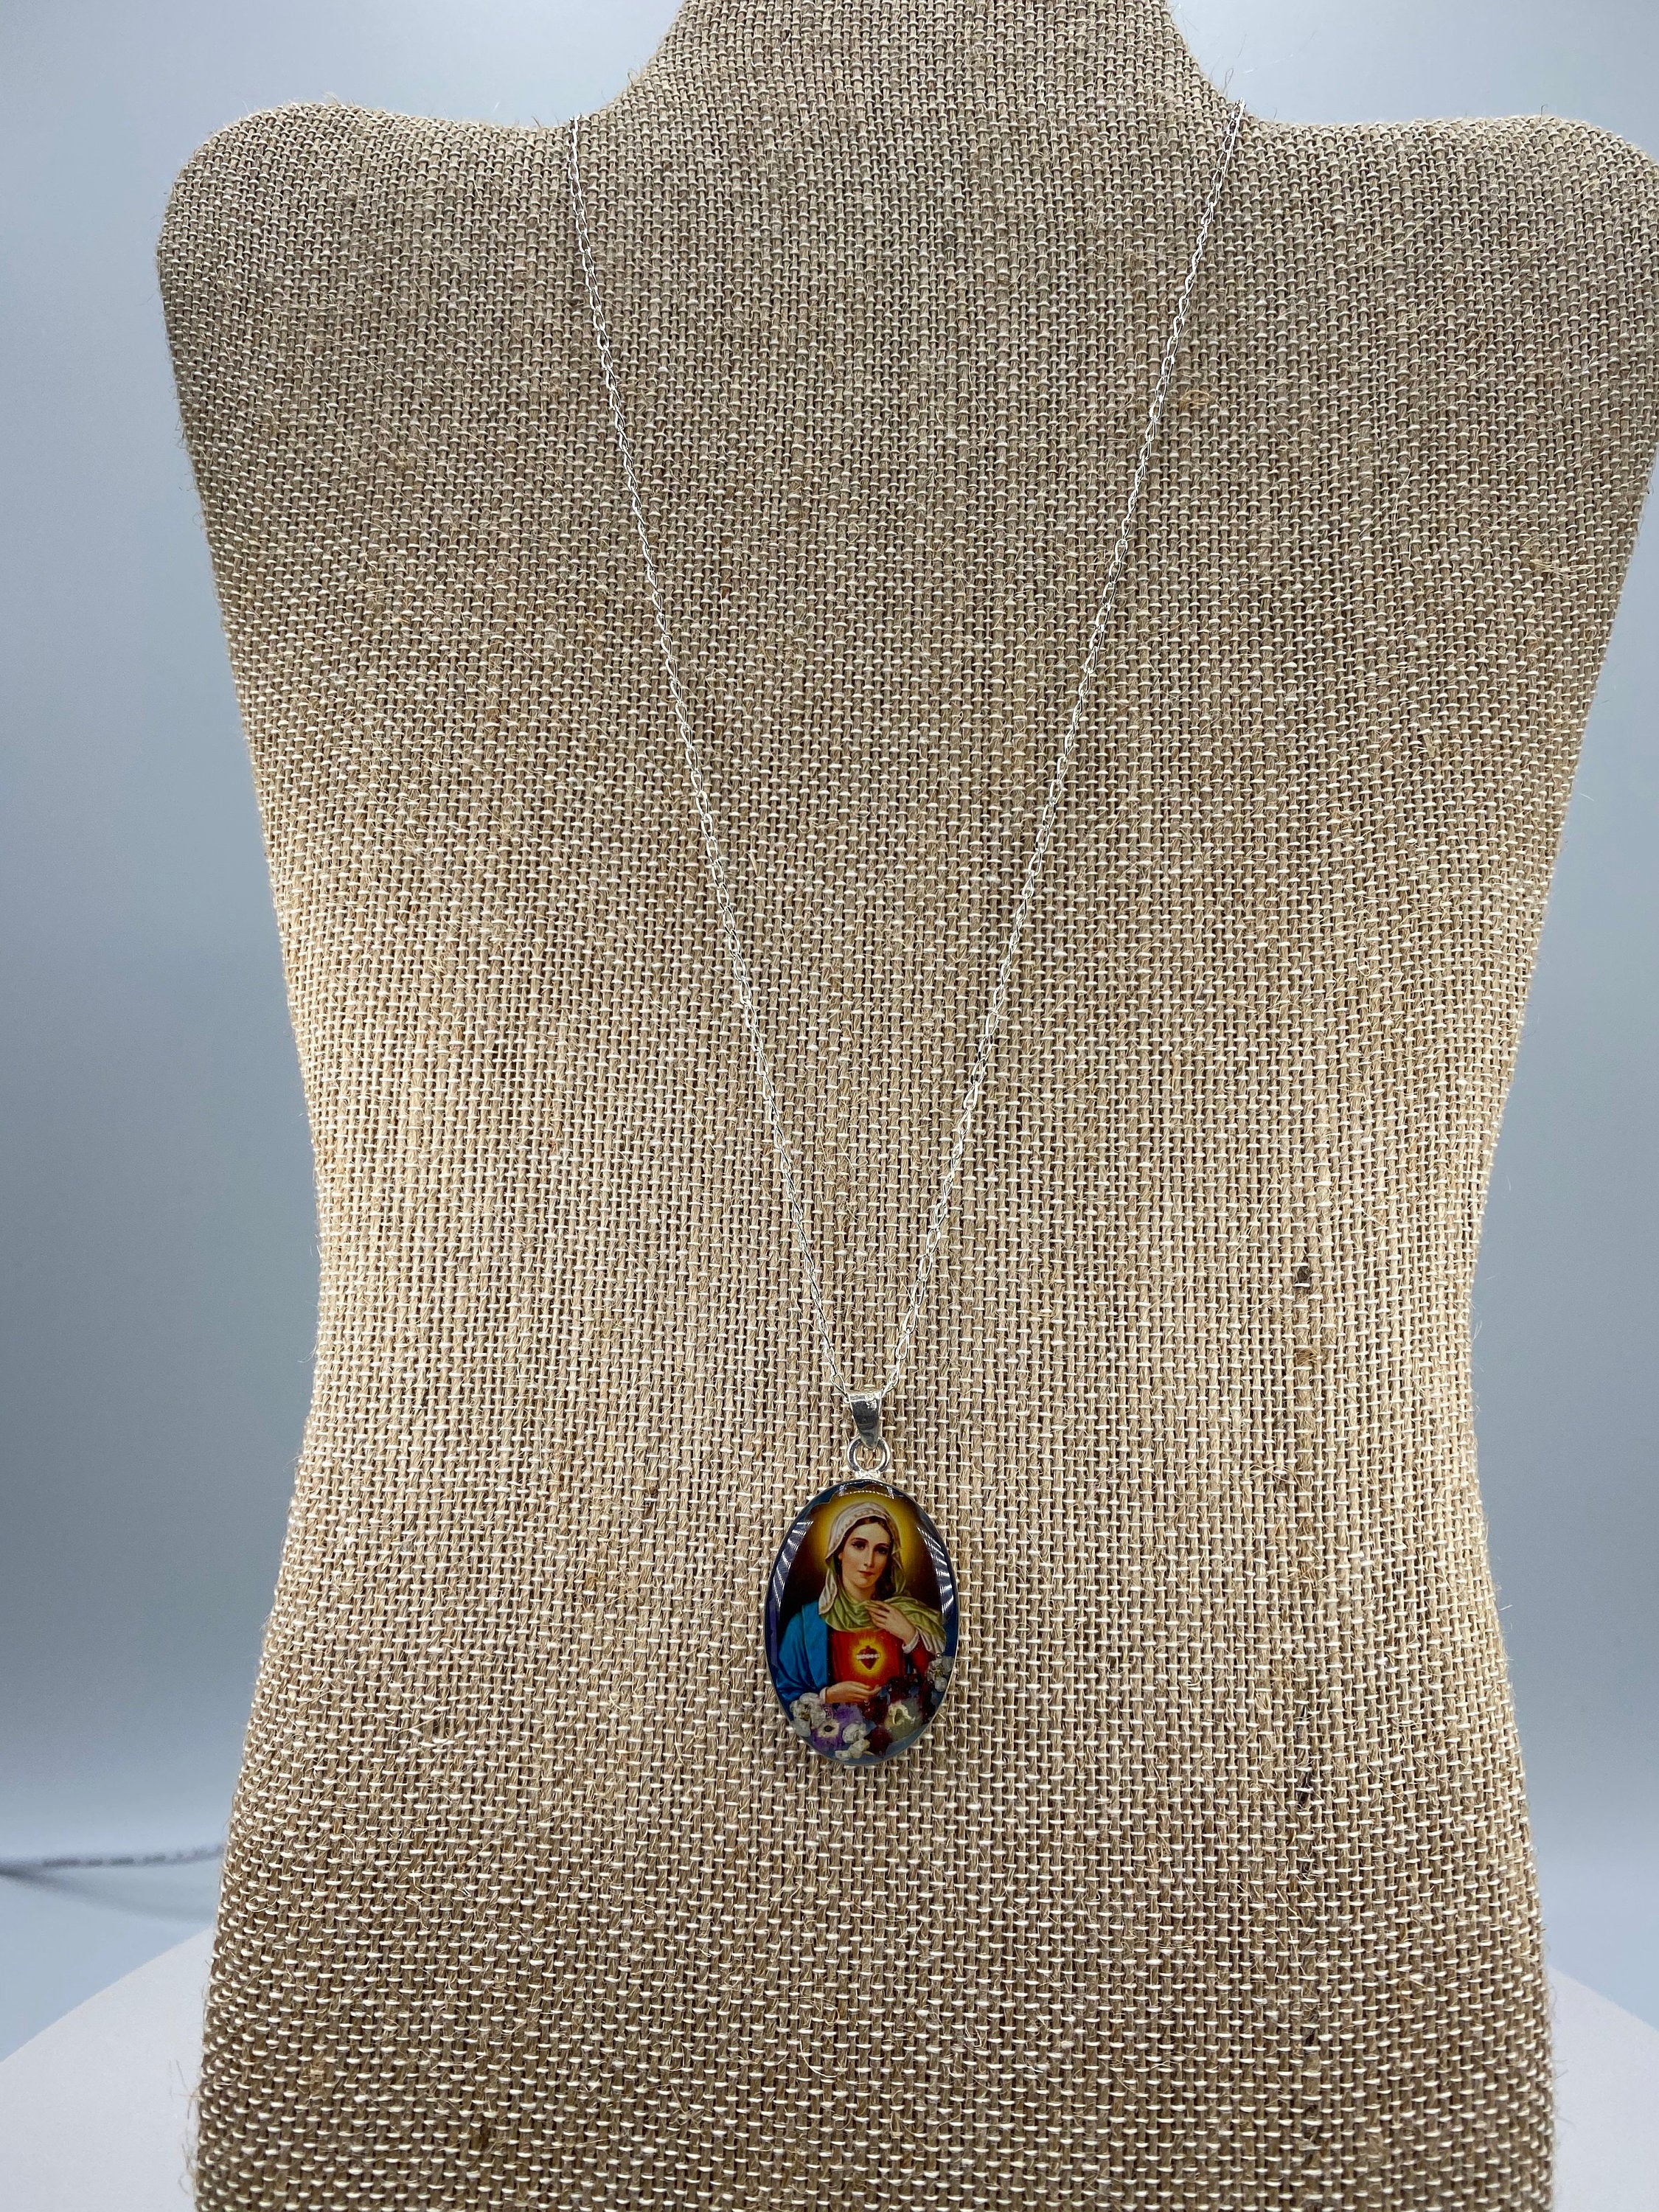 Immaculate Heart of Mary / Inmaculado Corazon de Maria - Guadalupe Collection